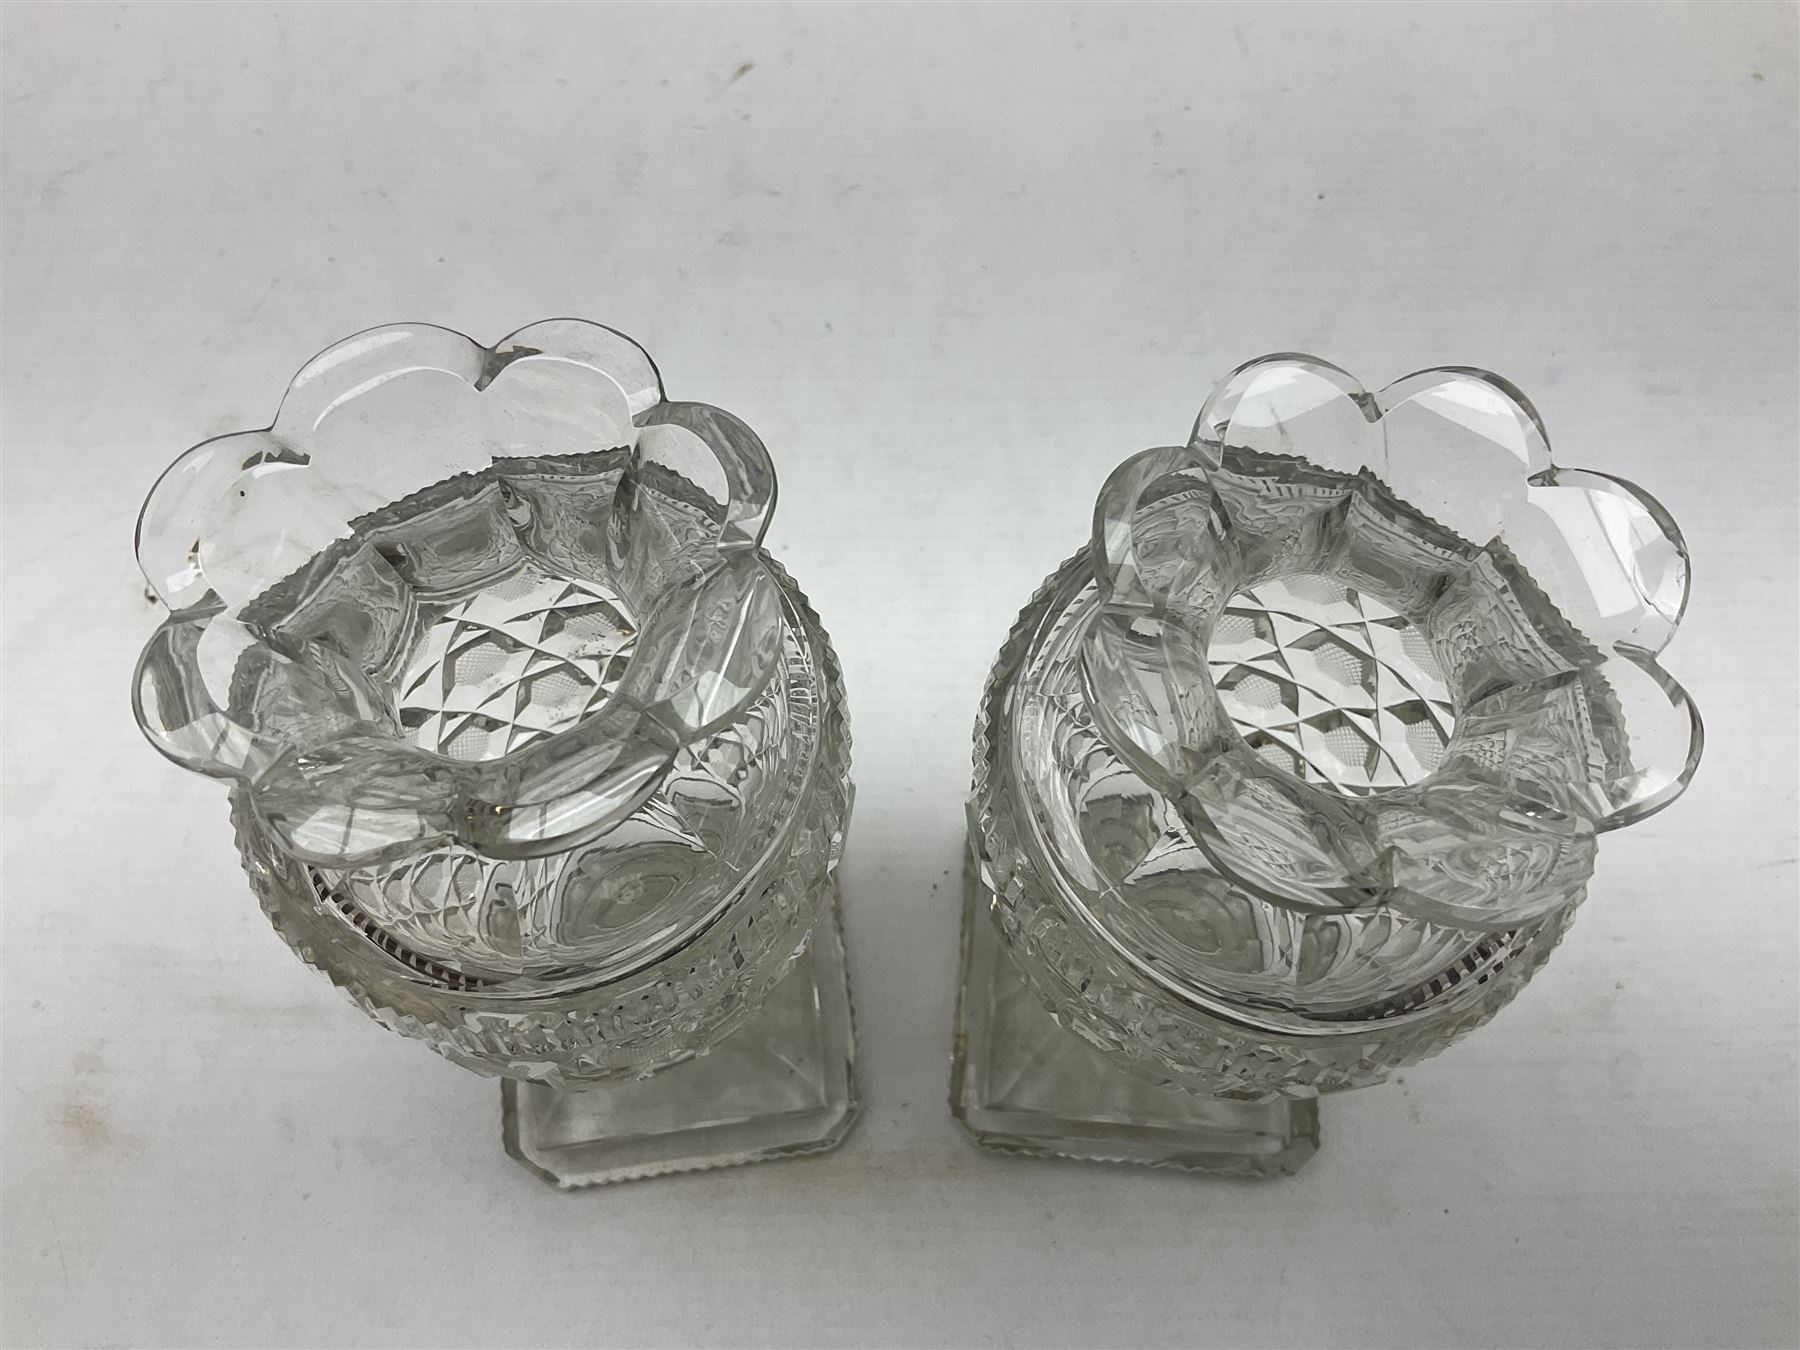 Pair of early 19th century heavy cut glass vases - Image 2 of 6